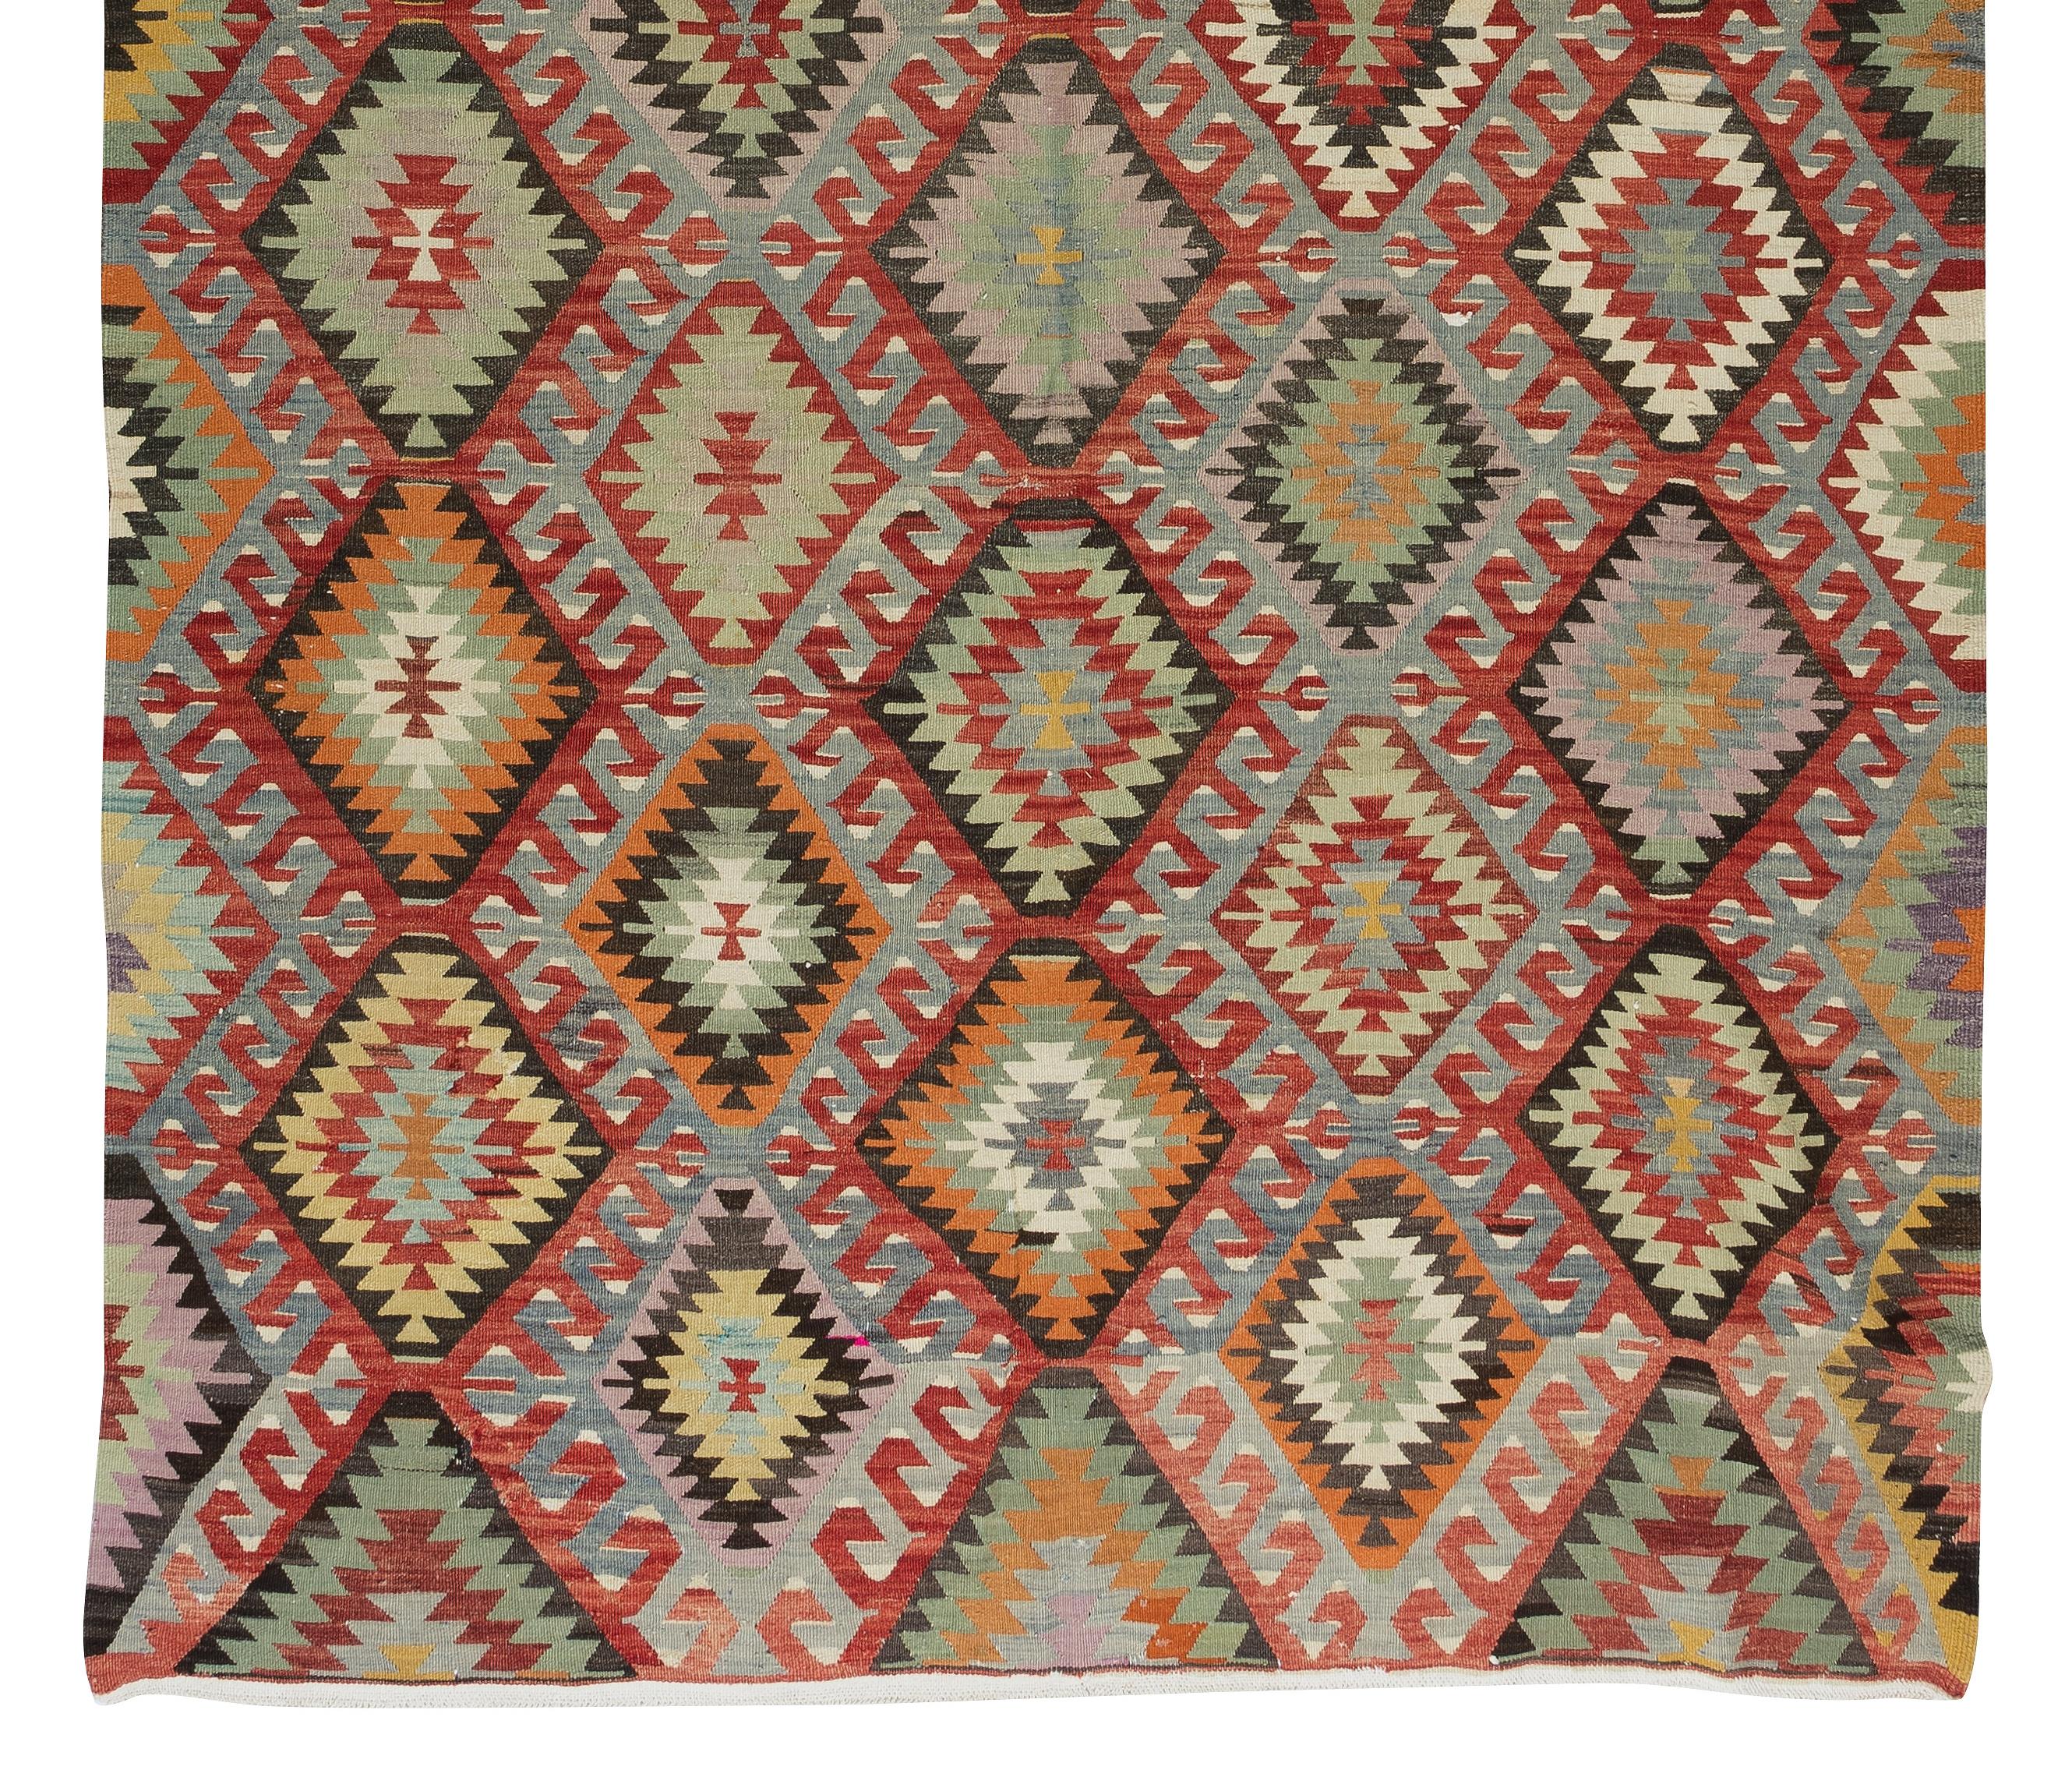 5.8x10 Ft One of a Kind Handmade Turkish Wool Kilim, Multicolored Flat-Weave Rug In Good Condition For Sale In Philadelphia, PA